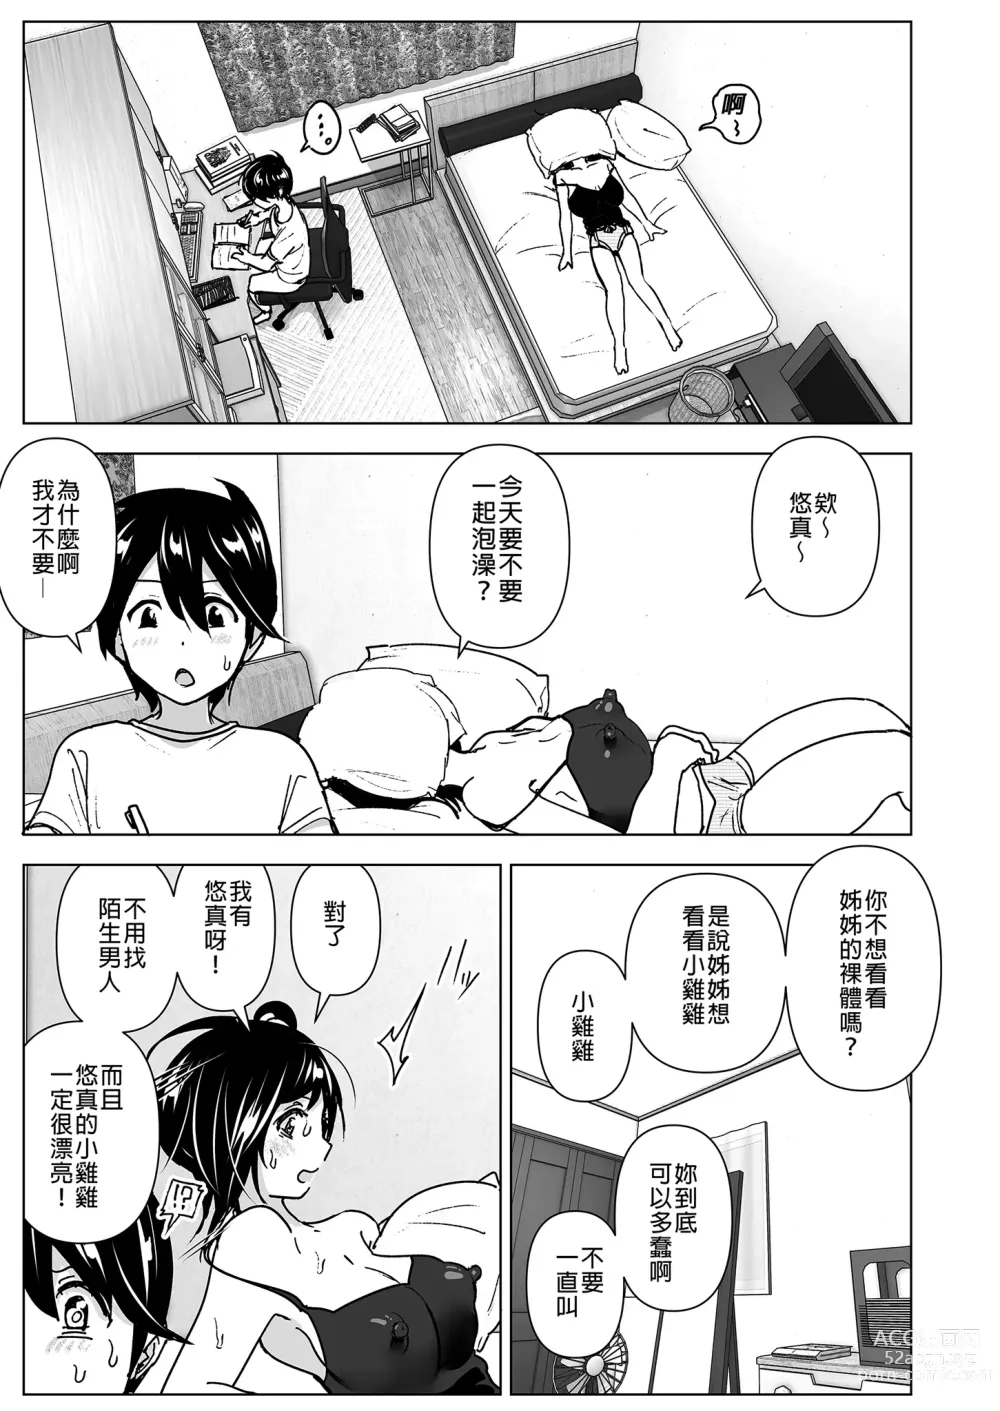 Page 5 of doujinshi 姊姊與傾聽怨言的弟弟